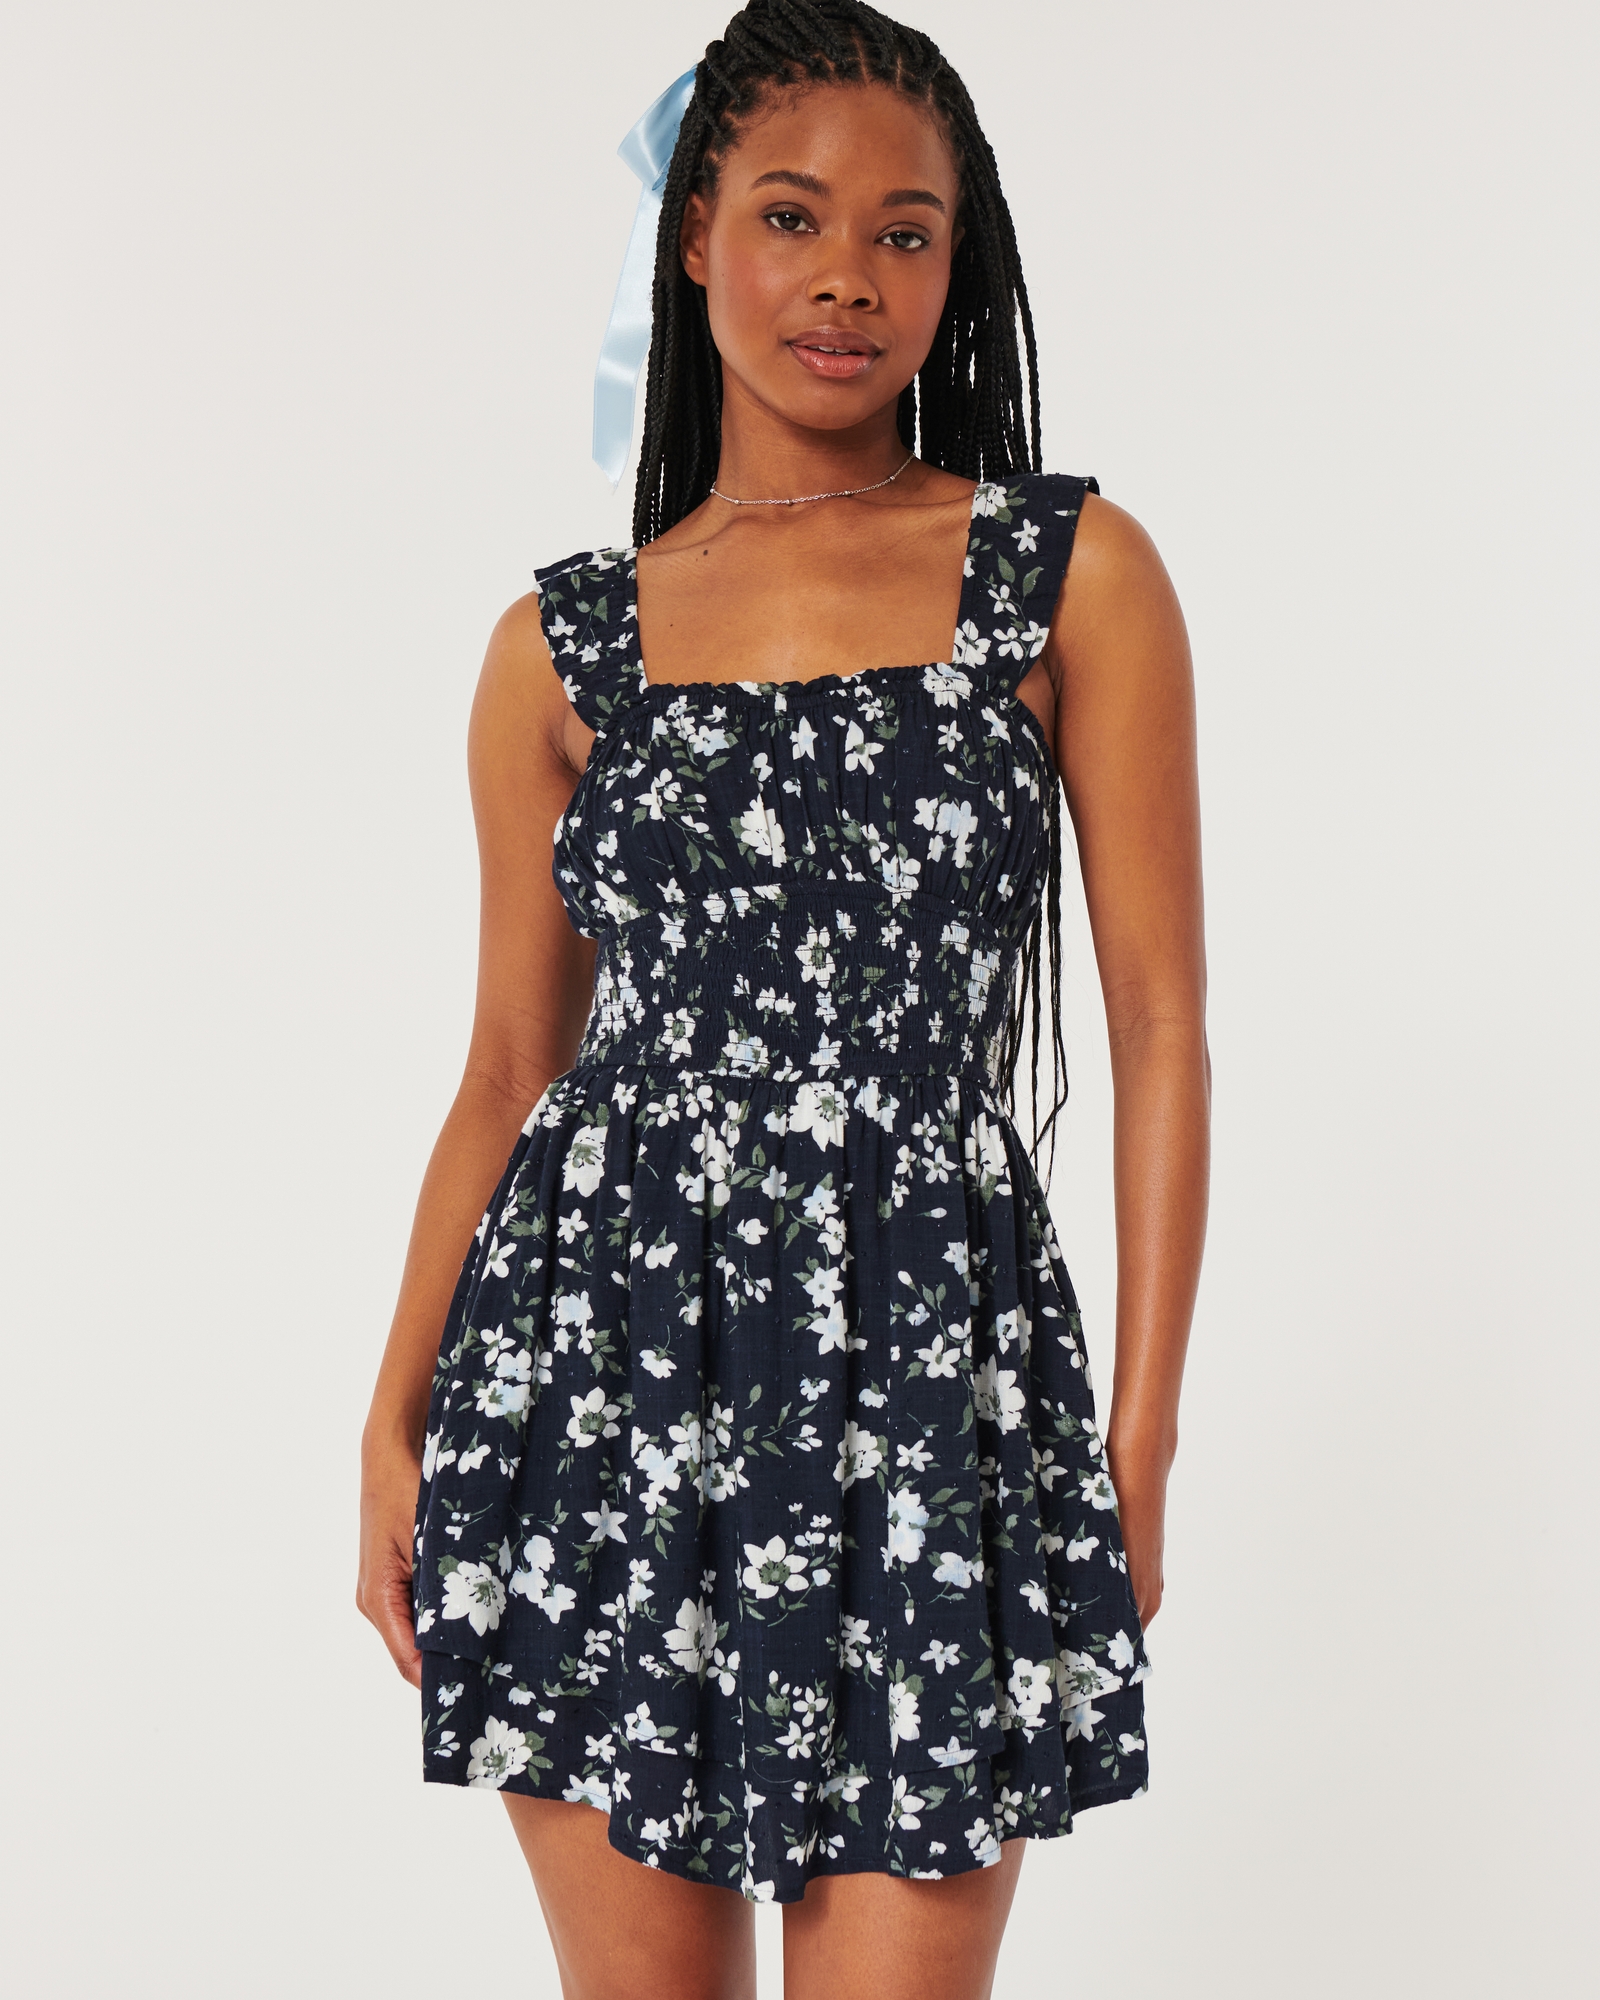 the hollister saidie skort dress is back in stock and ready for